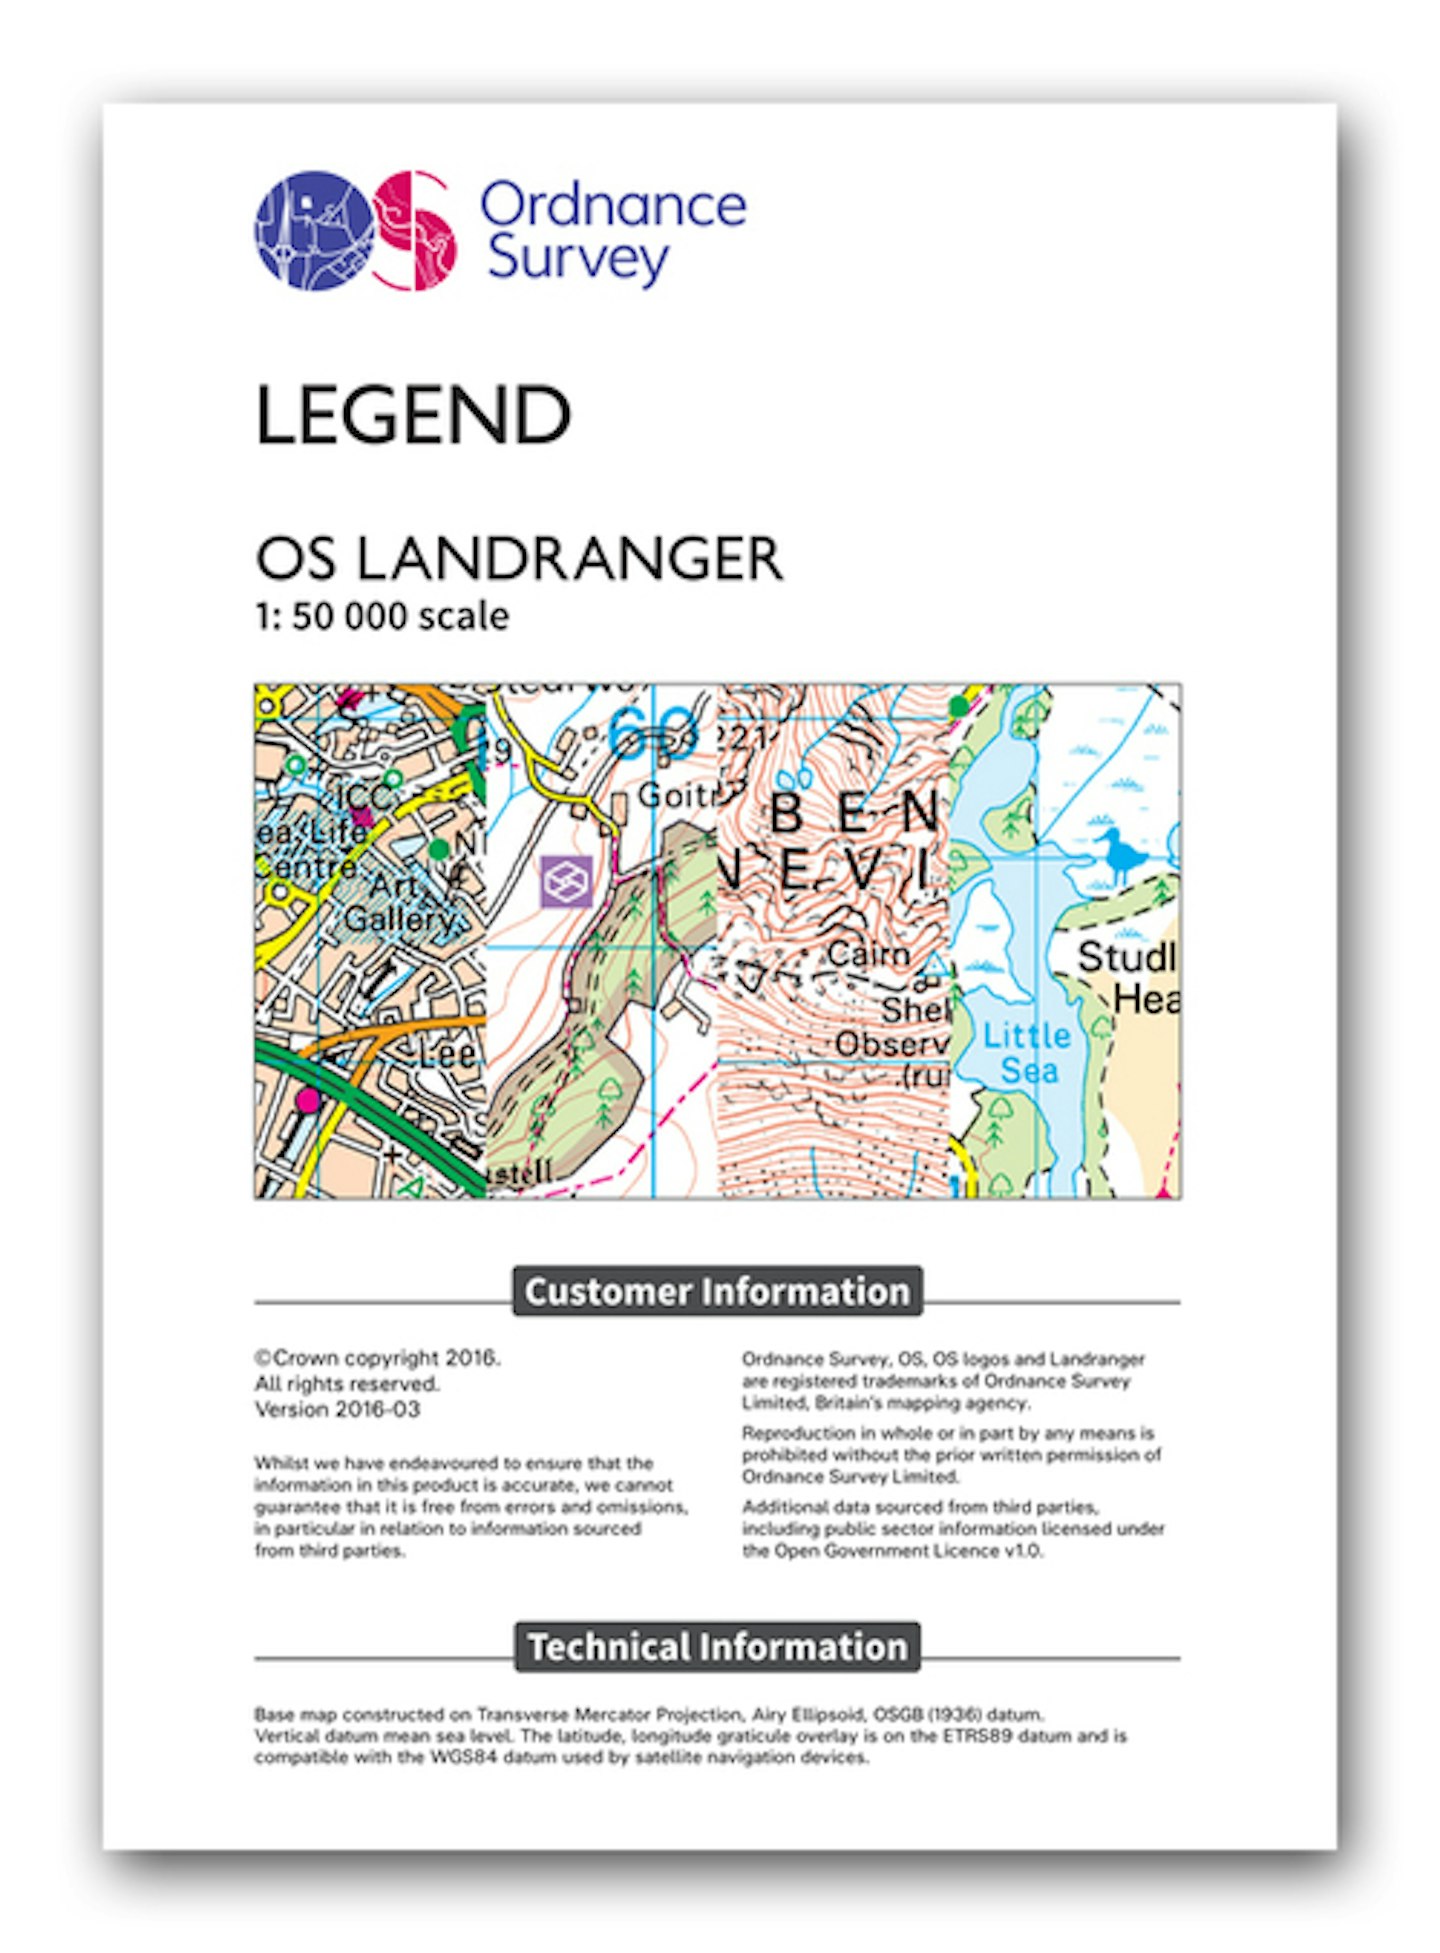 LEARN THE LEGEND - KNOW YOUR ORDNANCE SURVEY MAP SYMBOLS